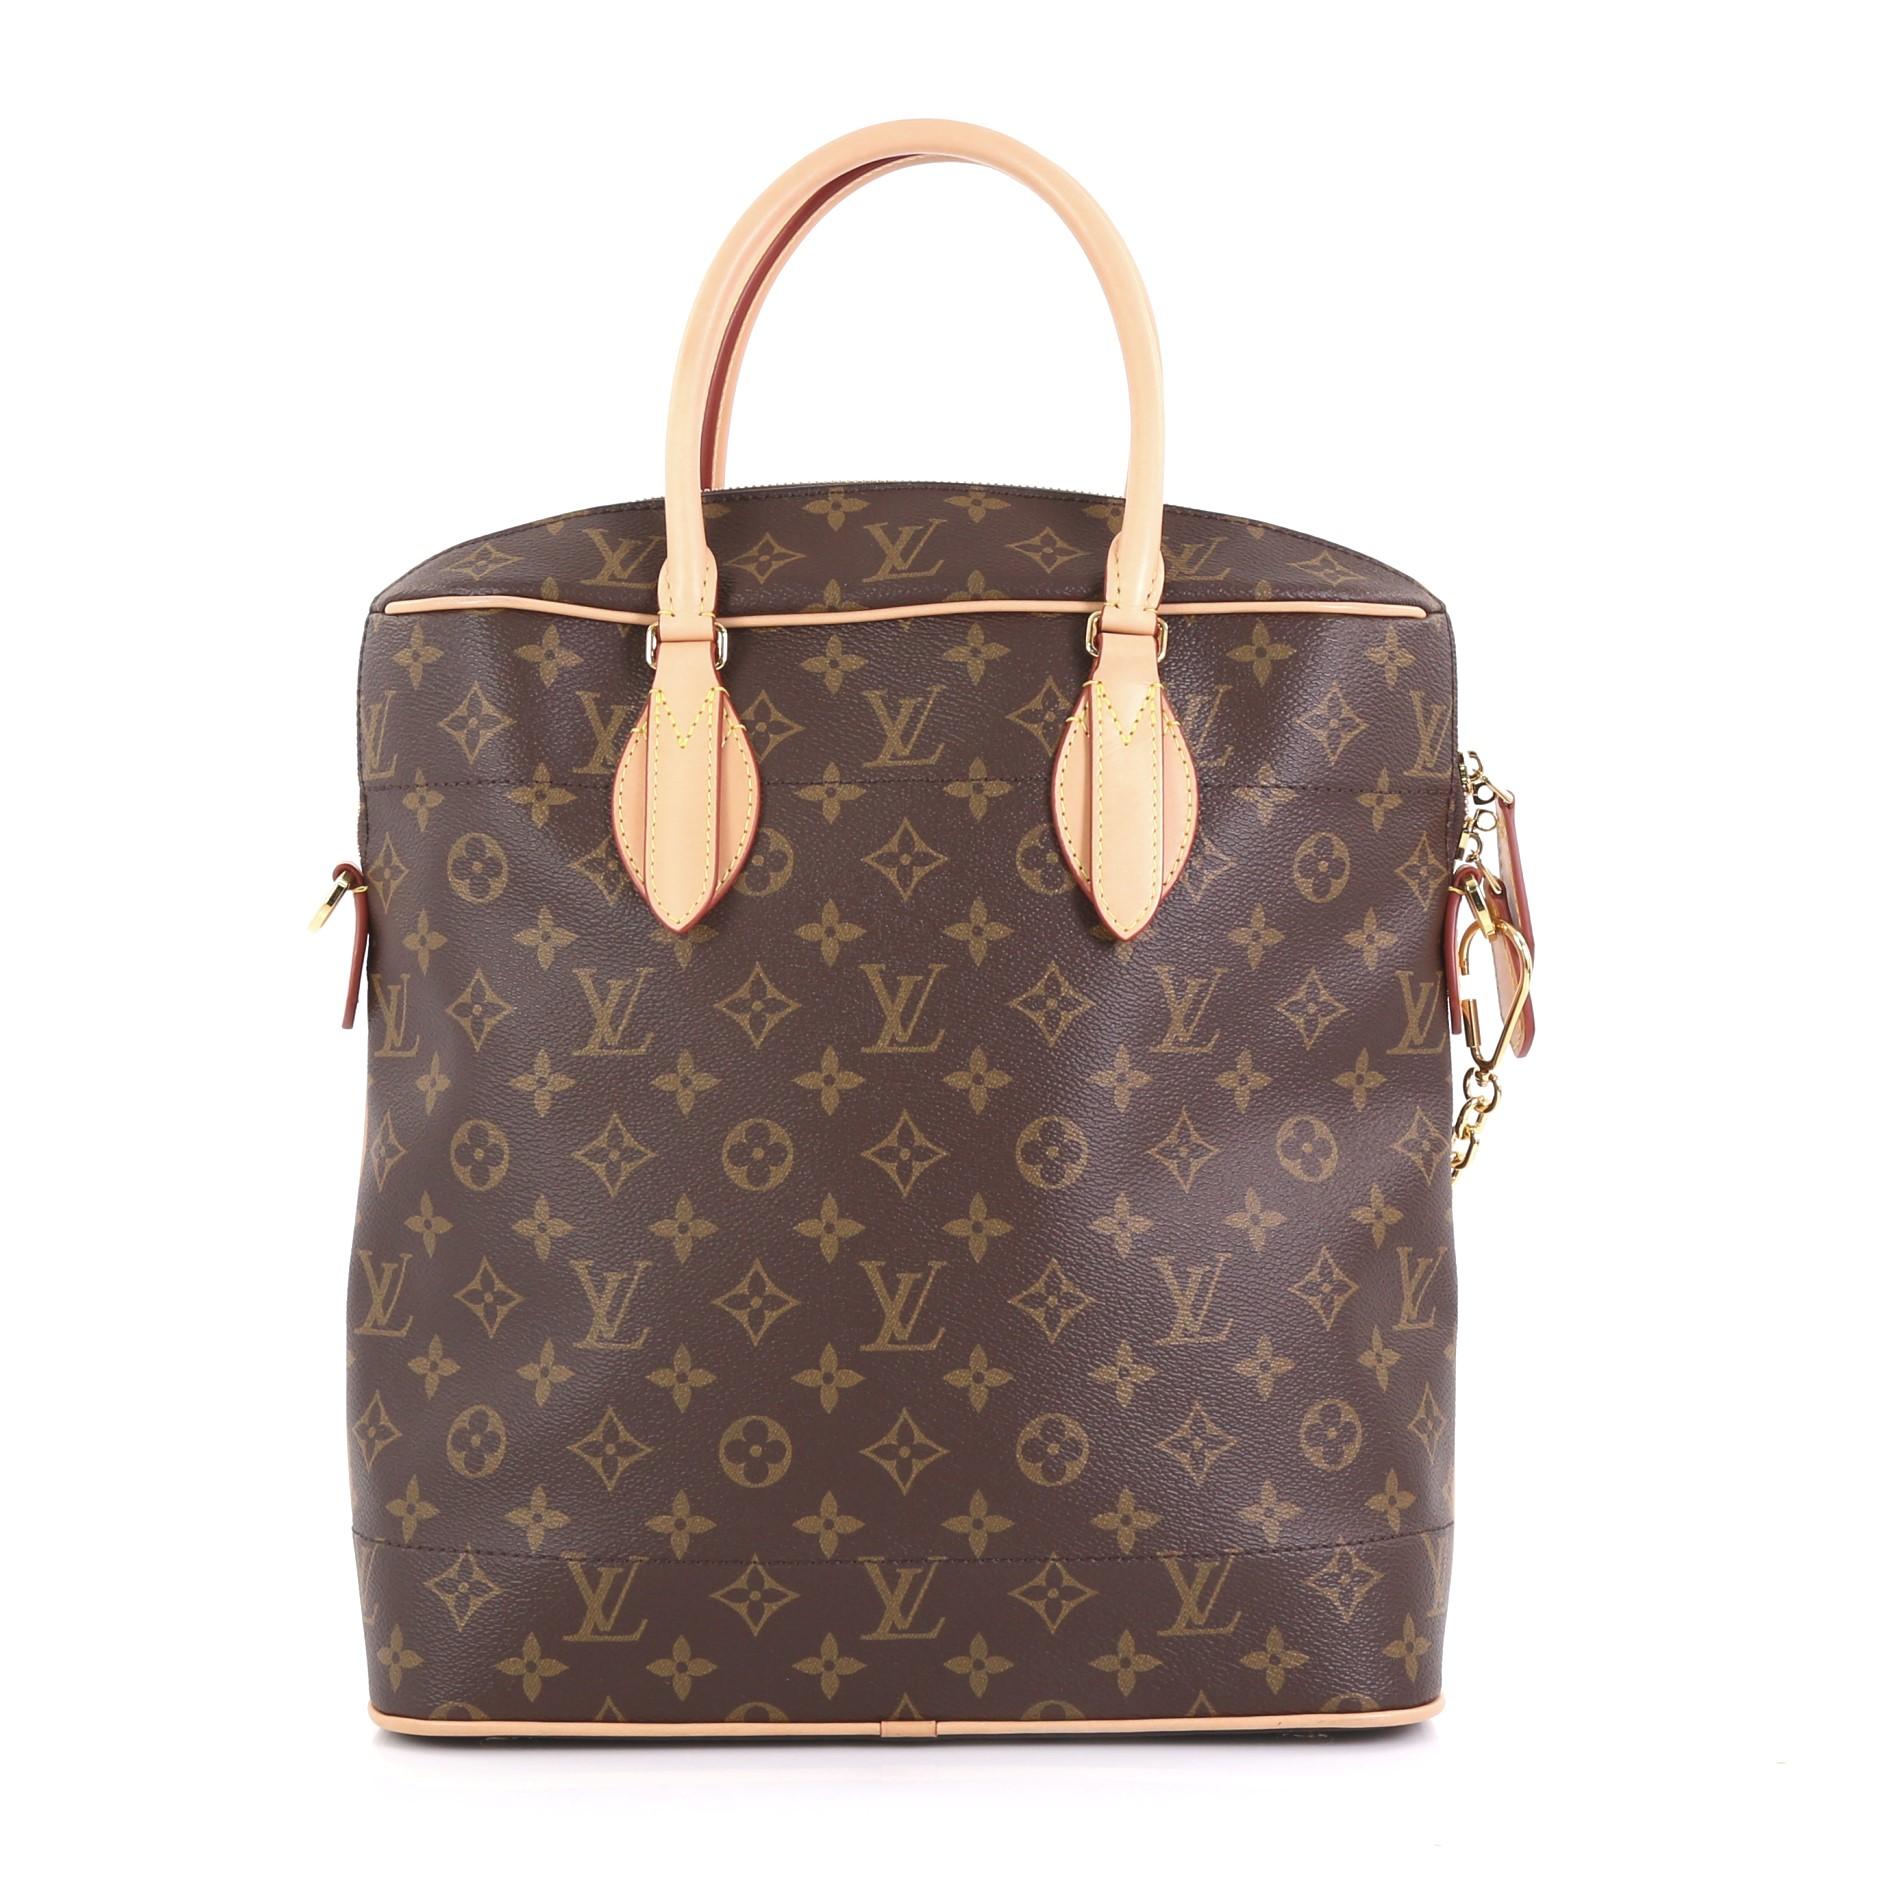 louis vuitton carry all mm